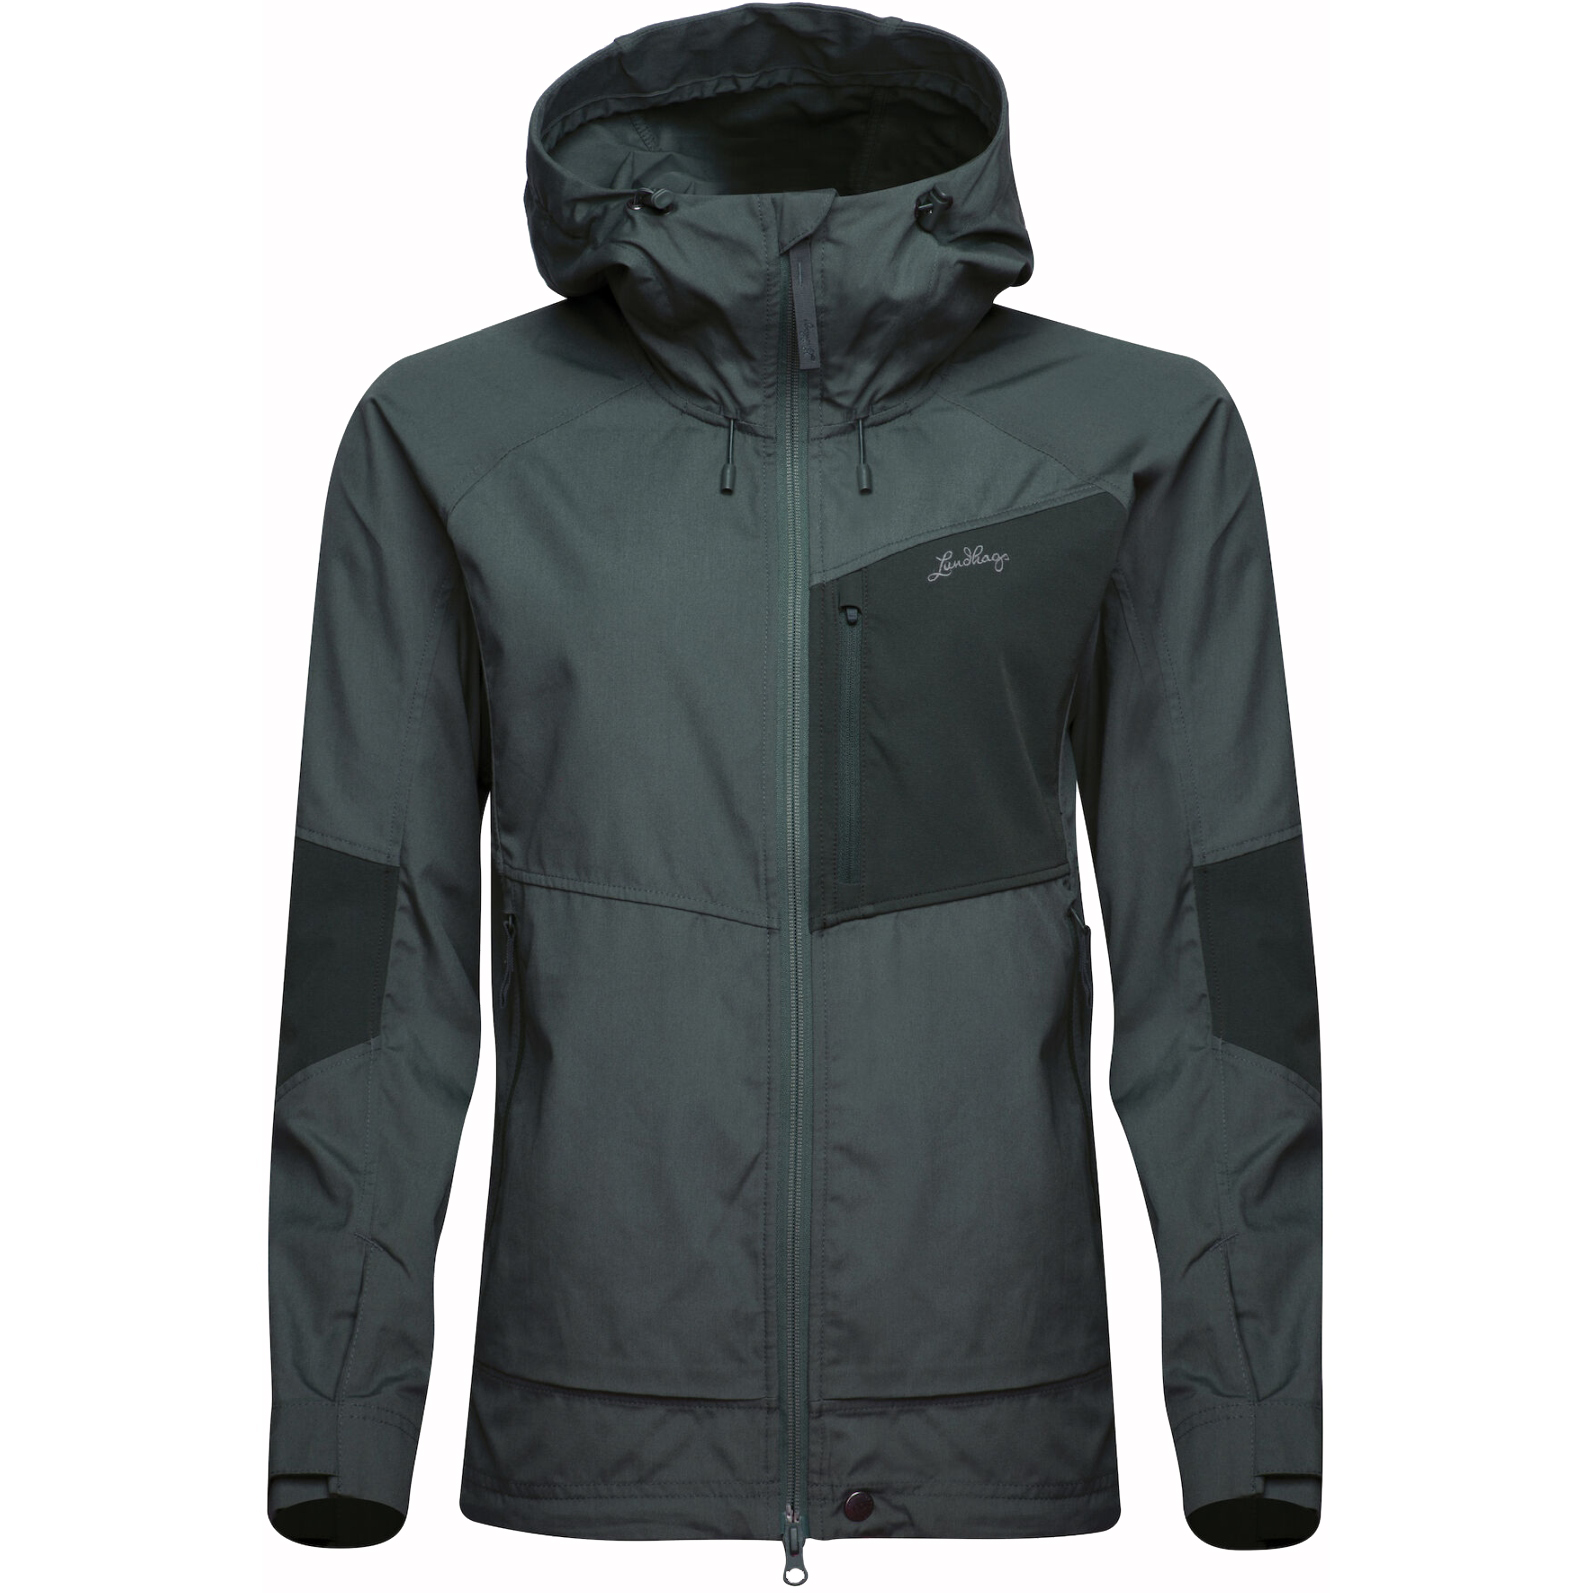 Picture of Lundhags Tived Stretch Hybrid Jacket Women - Dark Agave/Seaweed 655